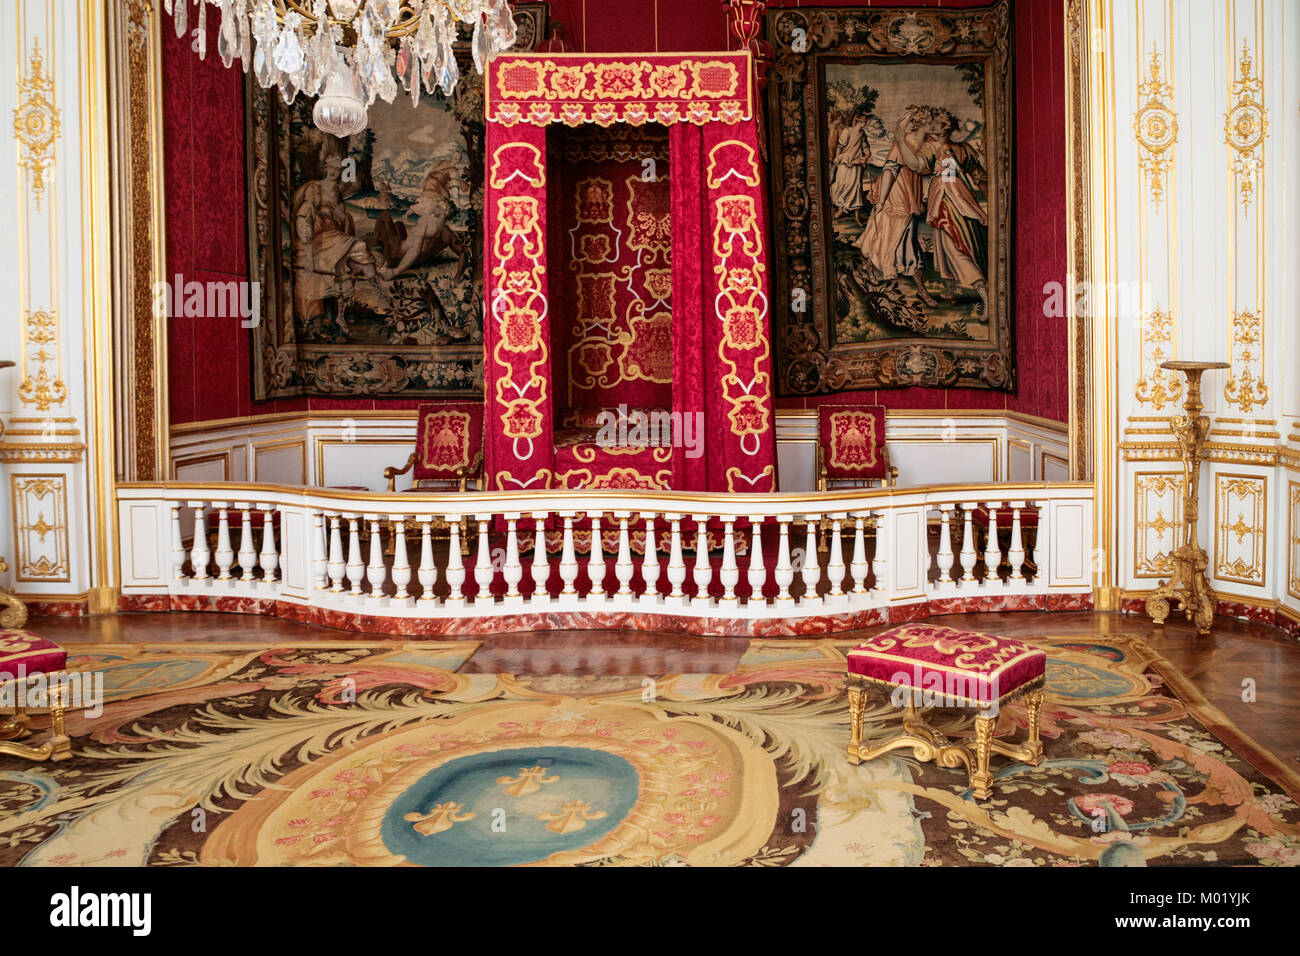 CHAMBORD, FRANCE - JULY 7, 2010: Louis XIV ceremonial bedroom in castle Chateau de Chambord. Chambord is the largest chateau in the Loire Valley, it w Stock Photo